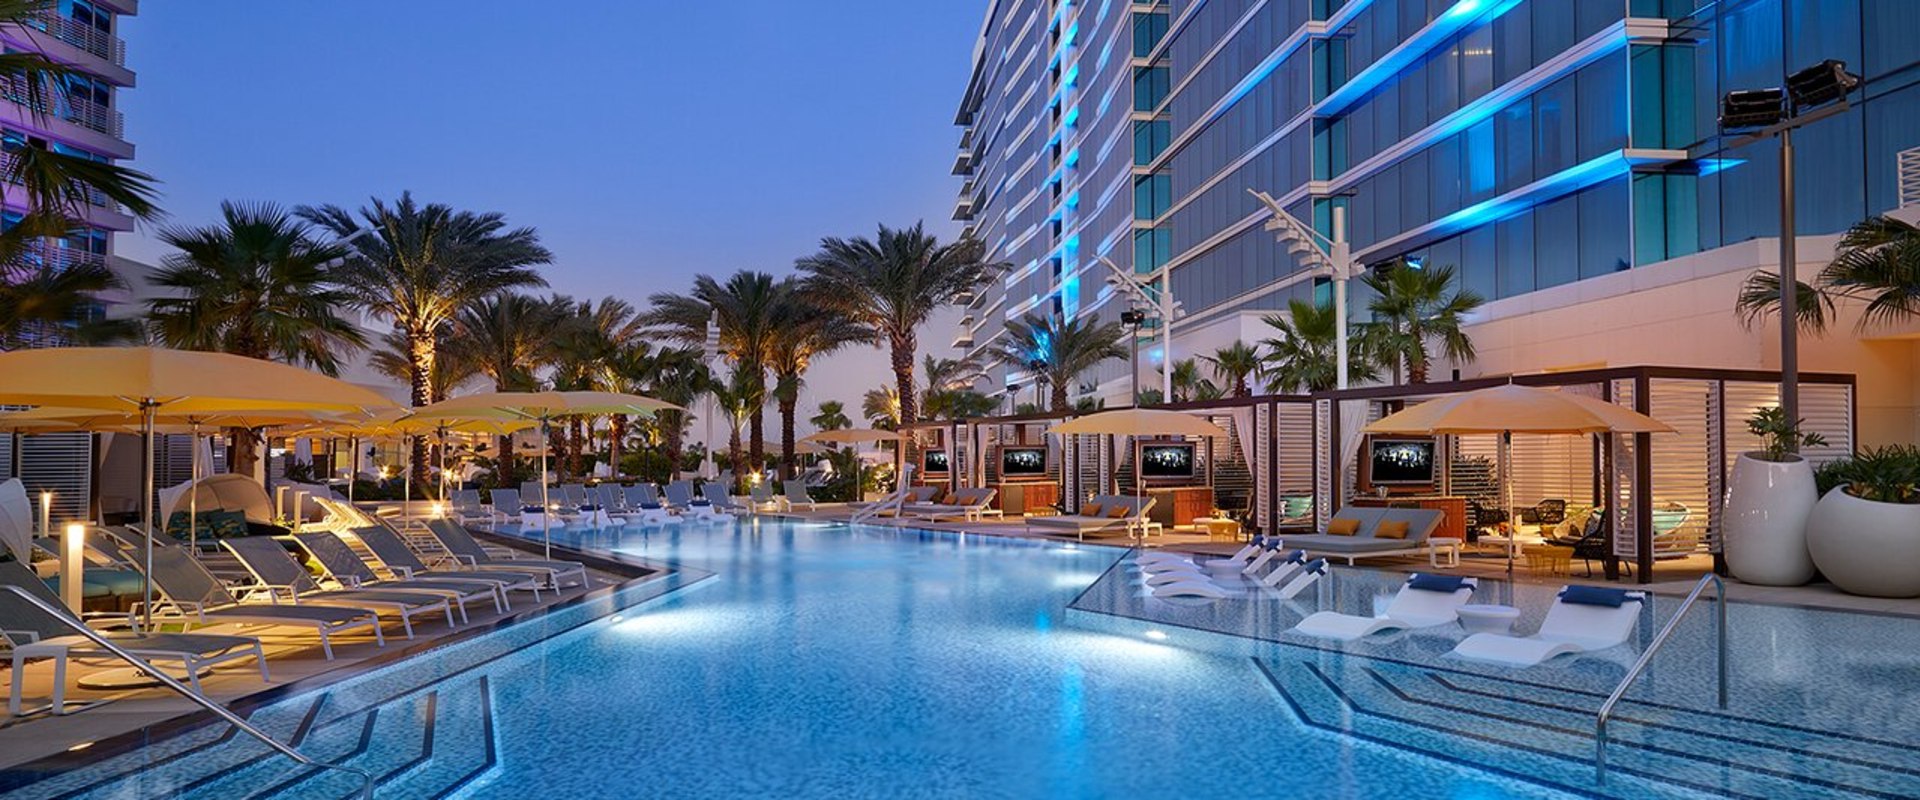 The Best 4-Star Hotels and Resorts in Tampa, Florida